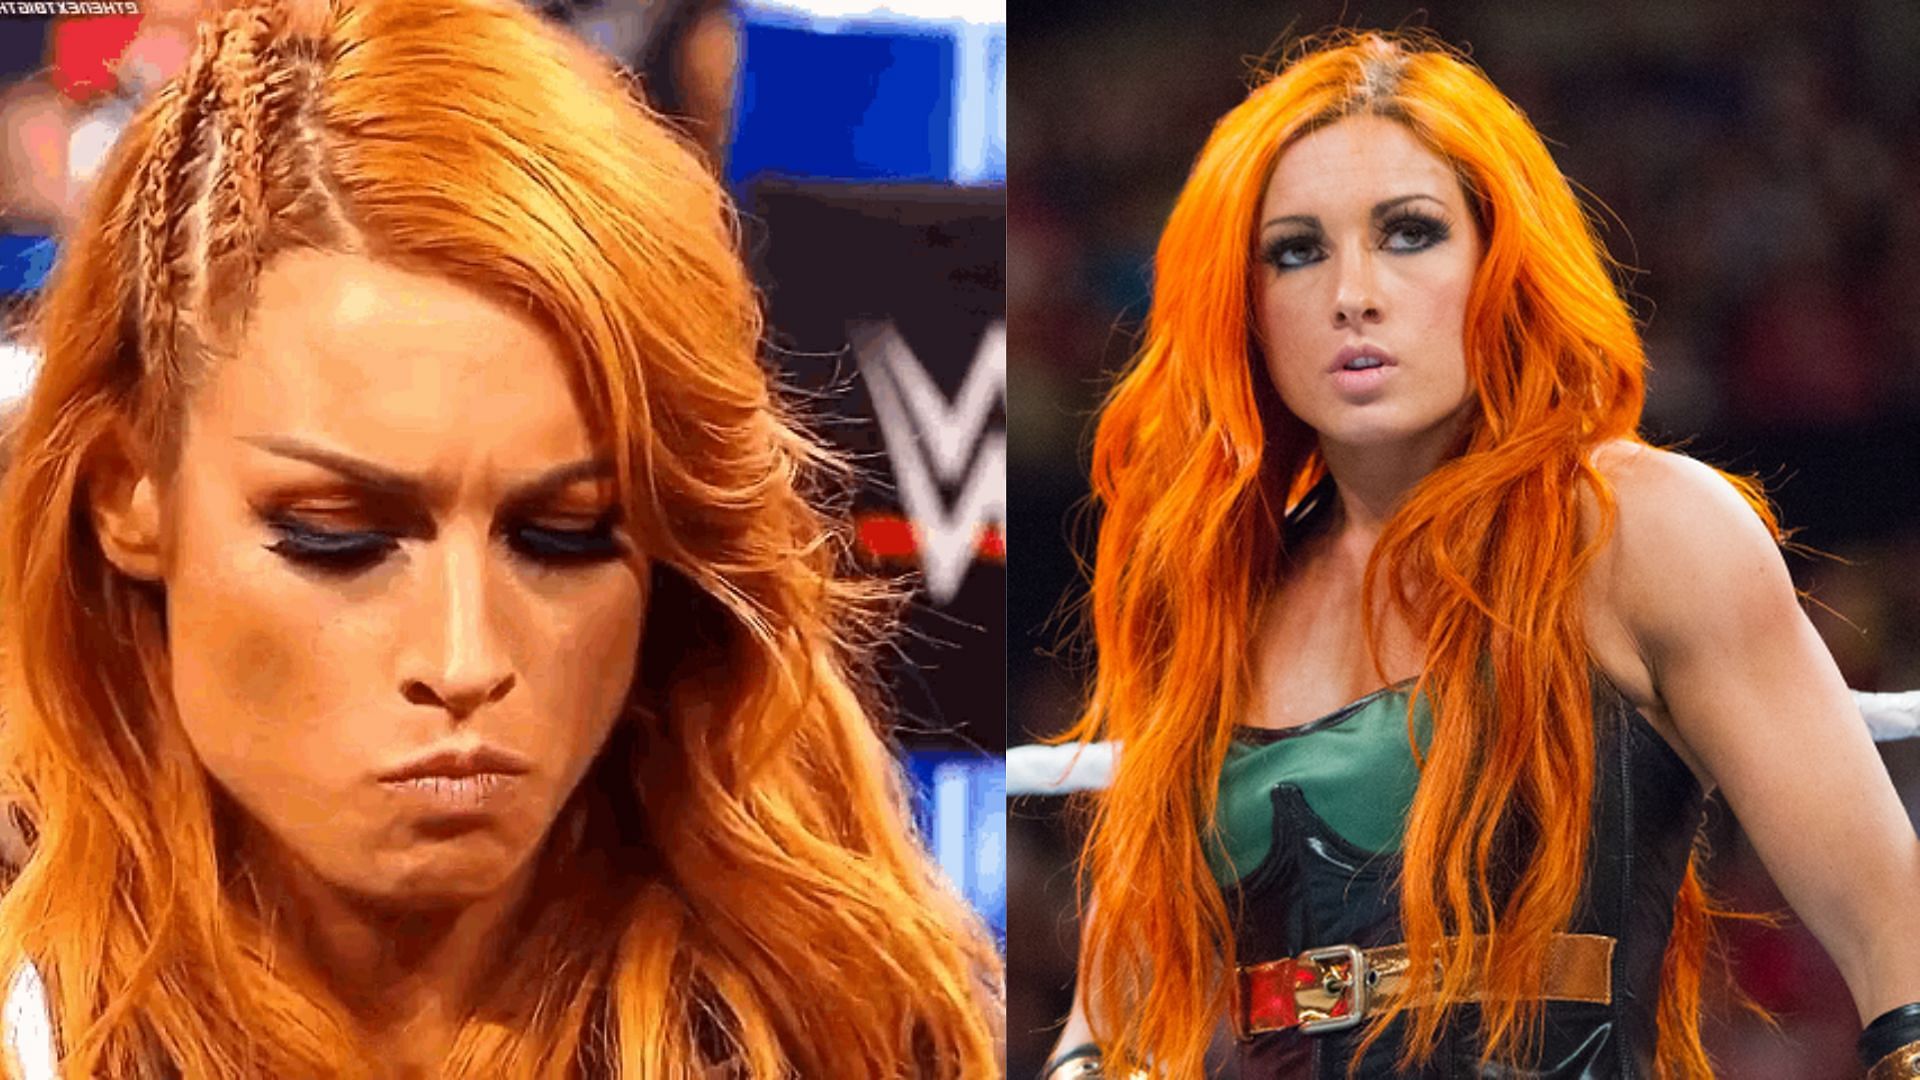 Photo: WWE RAW set ready for big match between Becky Lynch and long-time rival